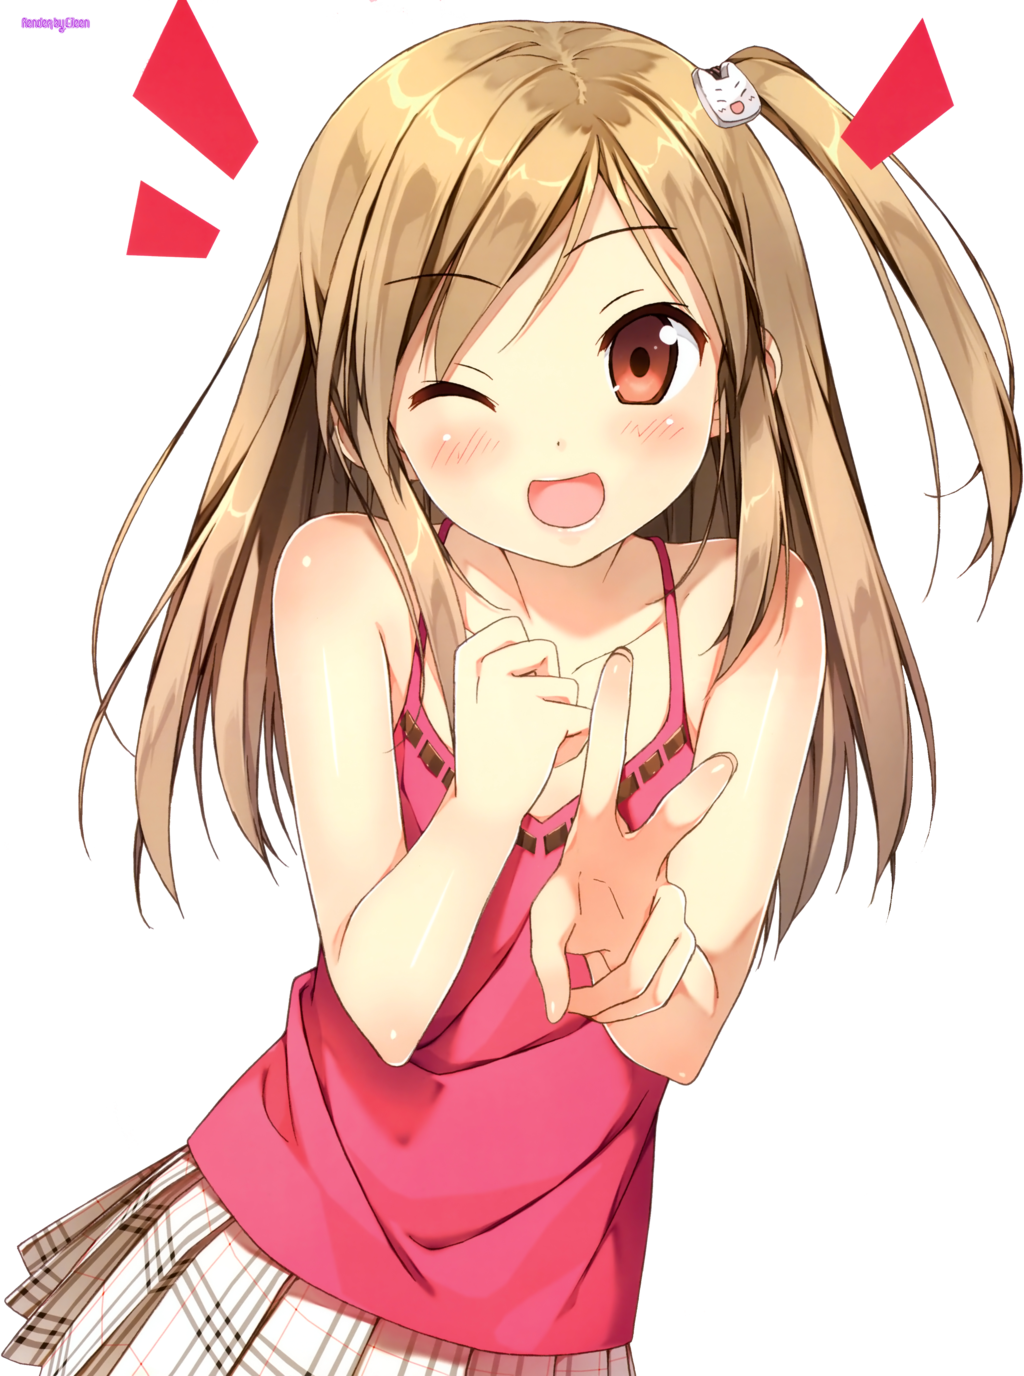 Download Cute Eyes Anime HD Image Free HQ PNG Image